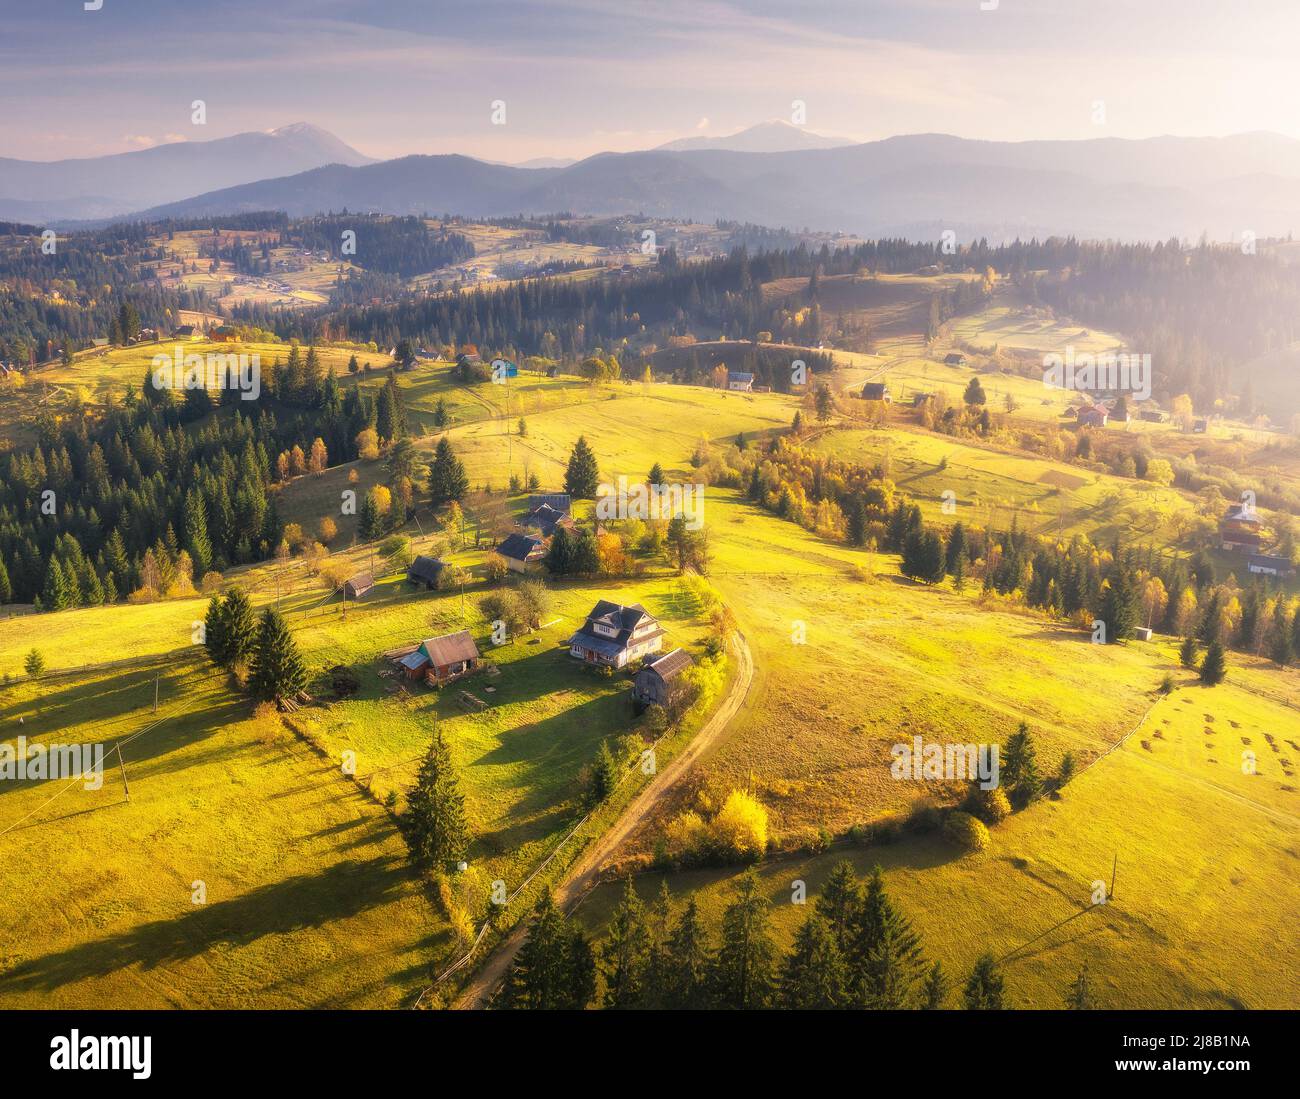 Aerial view of beautiful village in mountains at sunset Stock Photo